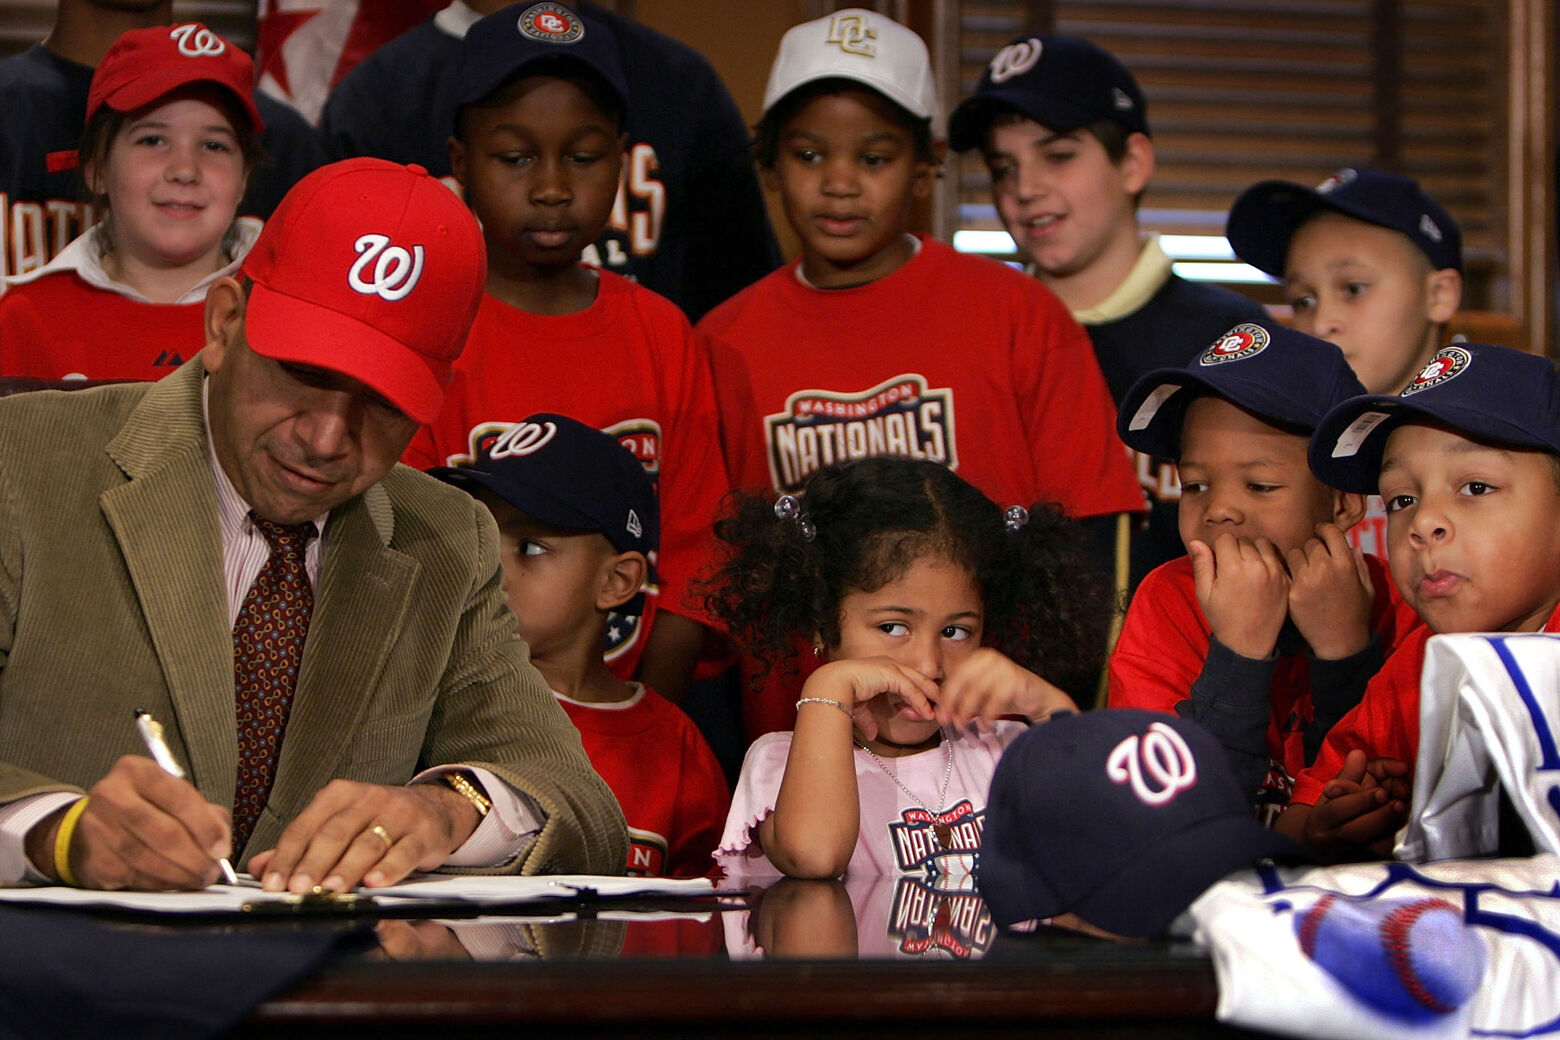 <p>WASHINGTON &#8211; DECEMBER 29: Surrounded by children, District of Columbia Mayor Anthony A. Williams signs the Ballpark Omnibus Financing and Revenue Act of 2004 that continues the process of returning baseball to the nation&#8217;s capital December 29, 2004 in Washington, DC. The Washington Nationals are scheduled to begin play at Robert F. Kennedy Memorial Stadium in the spring of 2005. (Photo by Joe Raedle/Getty Images)</p>
